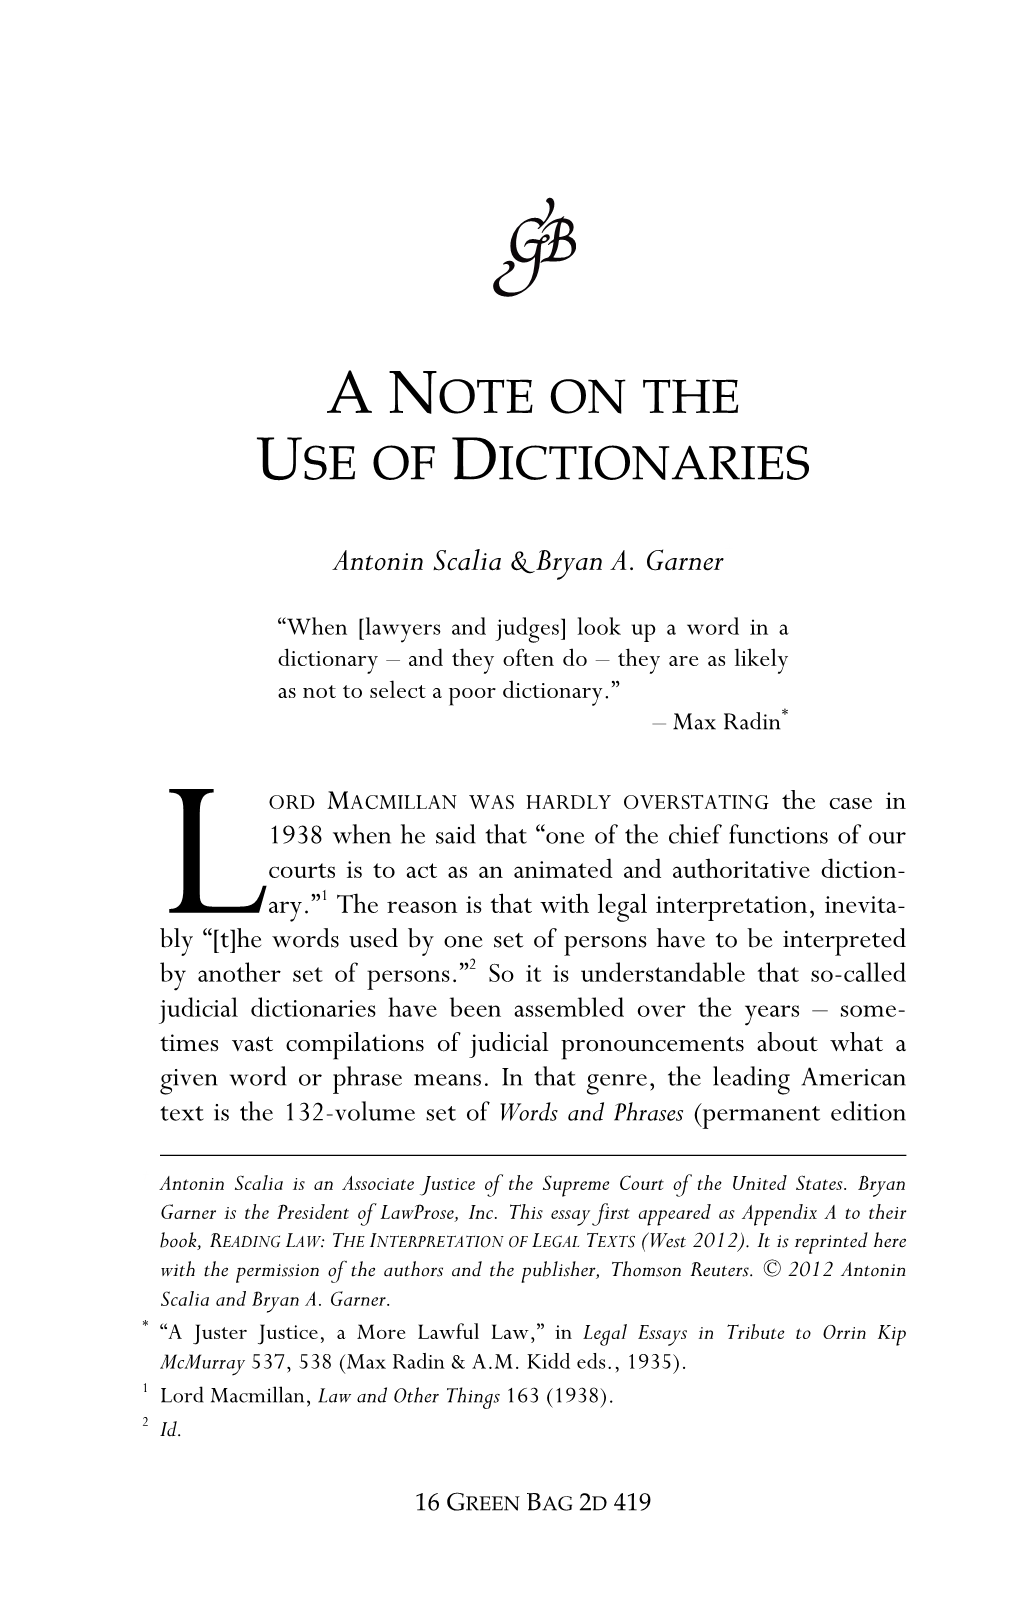 A Note on the Use of Dictionaries